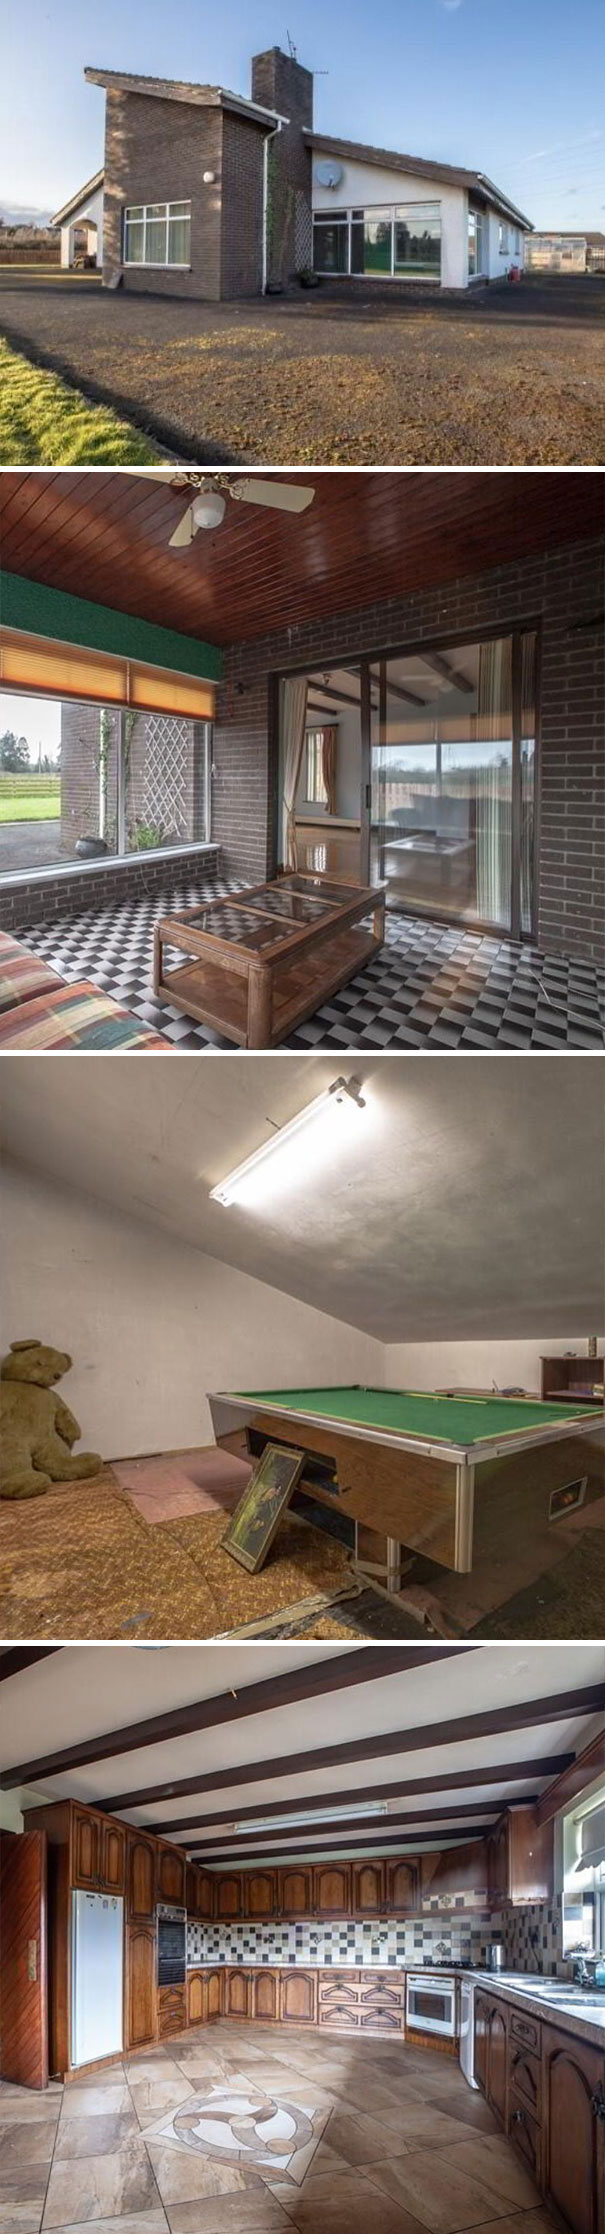 It Even Has A Pool Table..